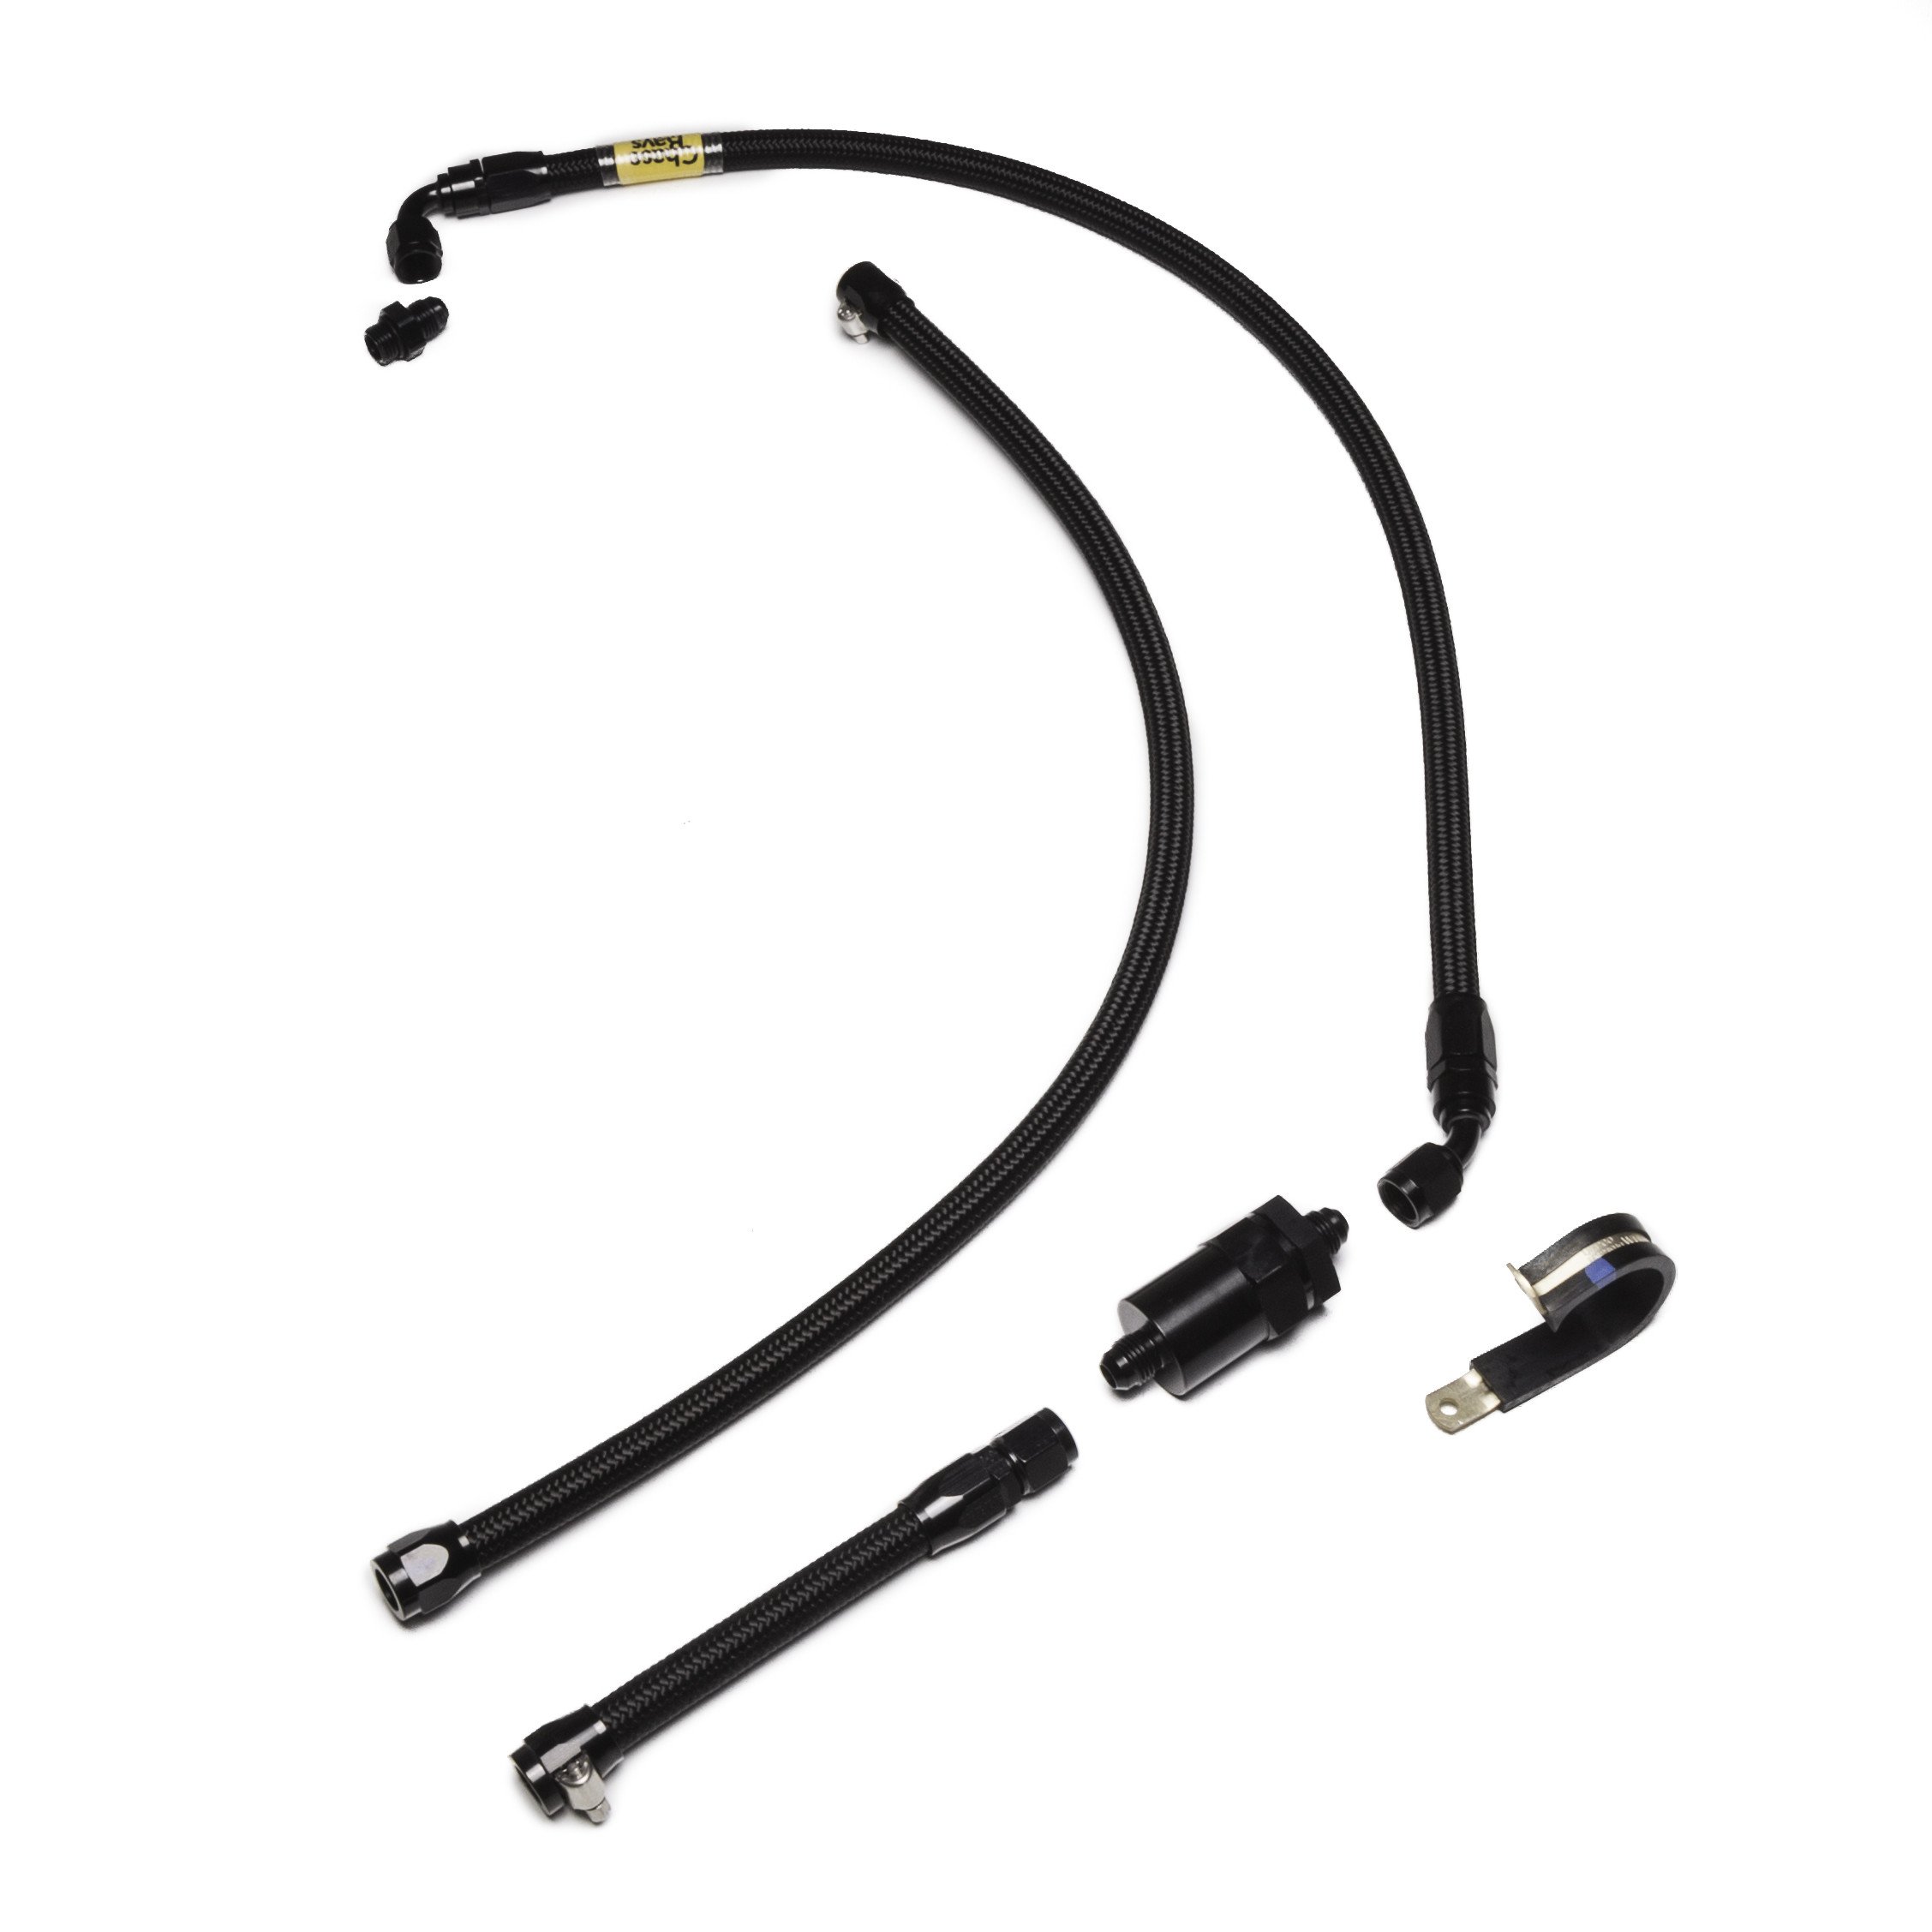 Chase Bays Fuel Line Kit - Nissan 240sx S13 / S14 / S15 with RB20DET, RB25DET